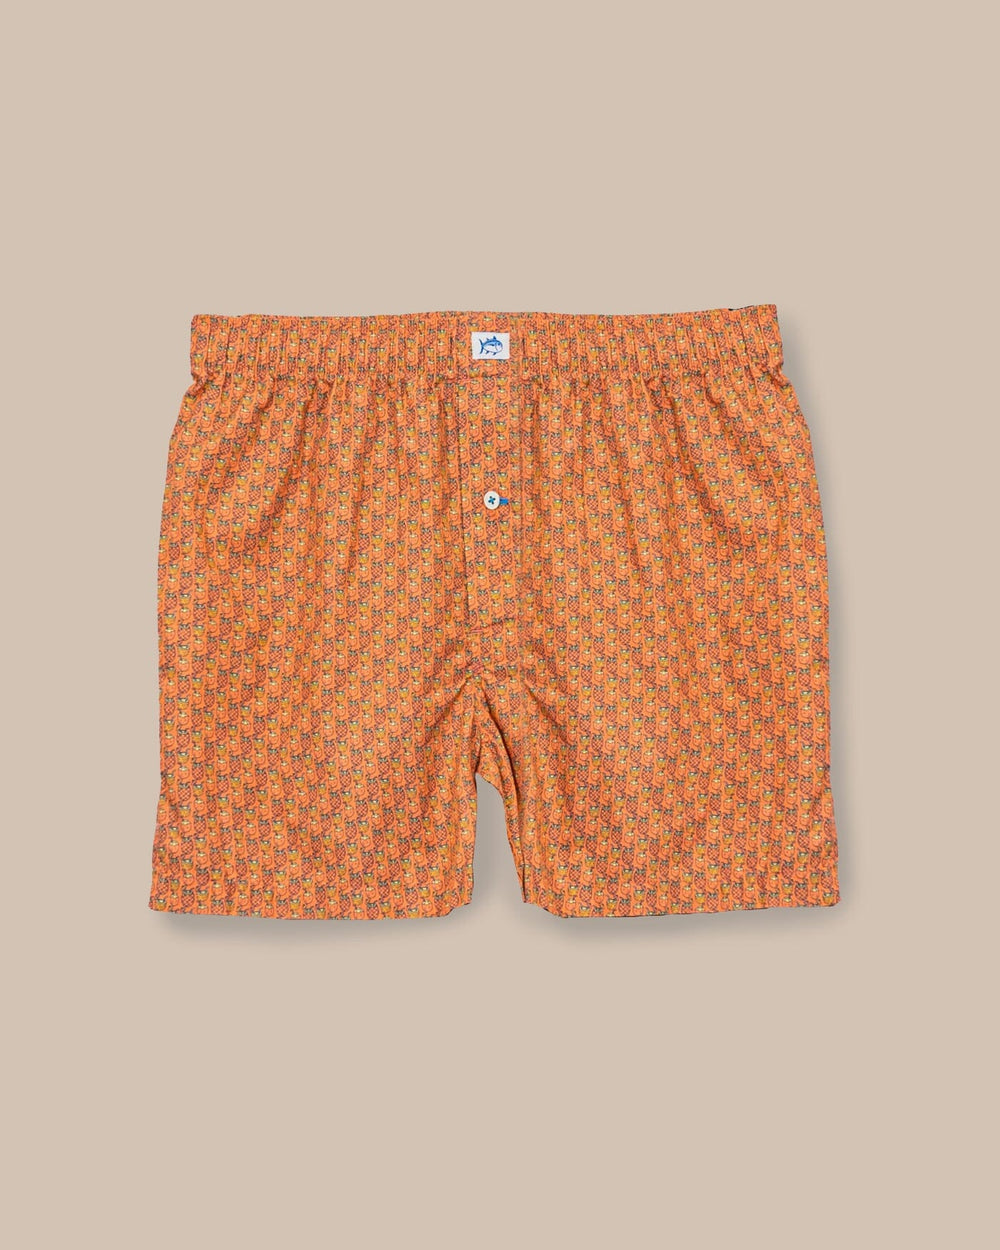 The front view of the Southern Tide Vacation Views Boxer by Southern Tide - Desert Flower Coral